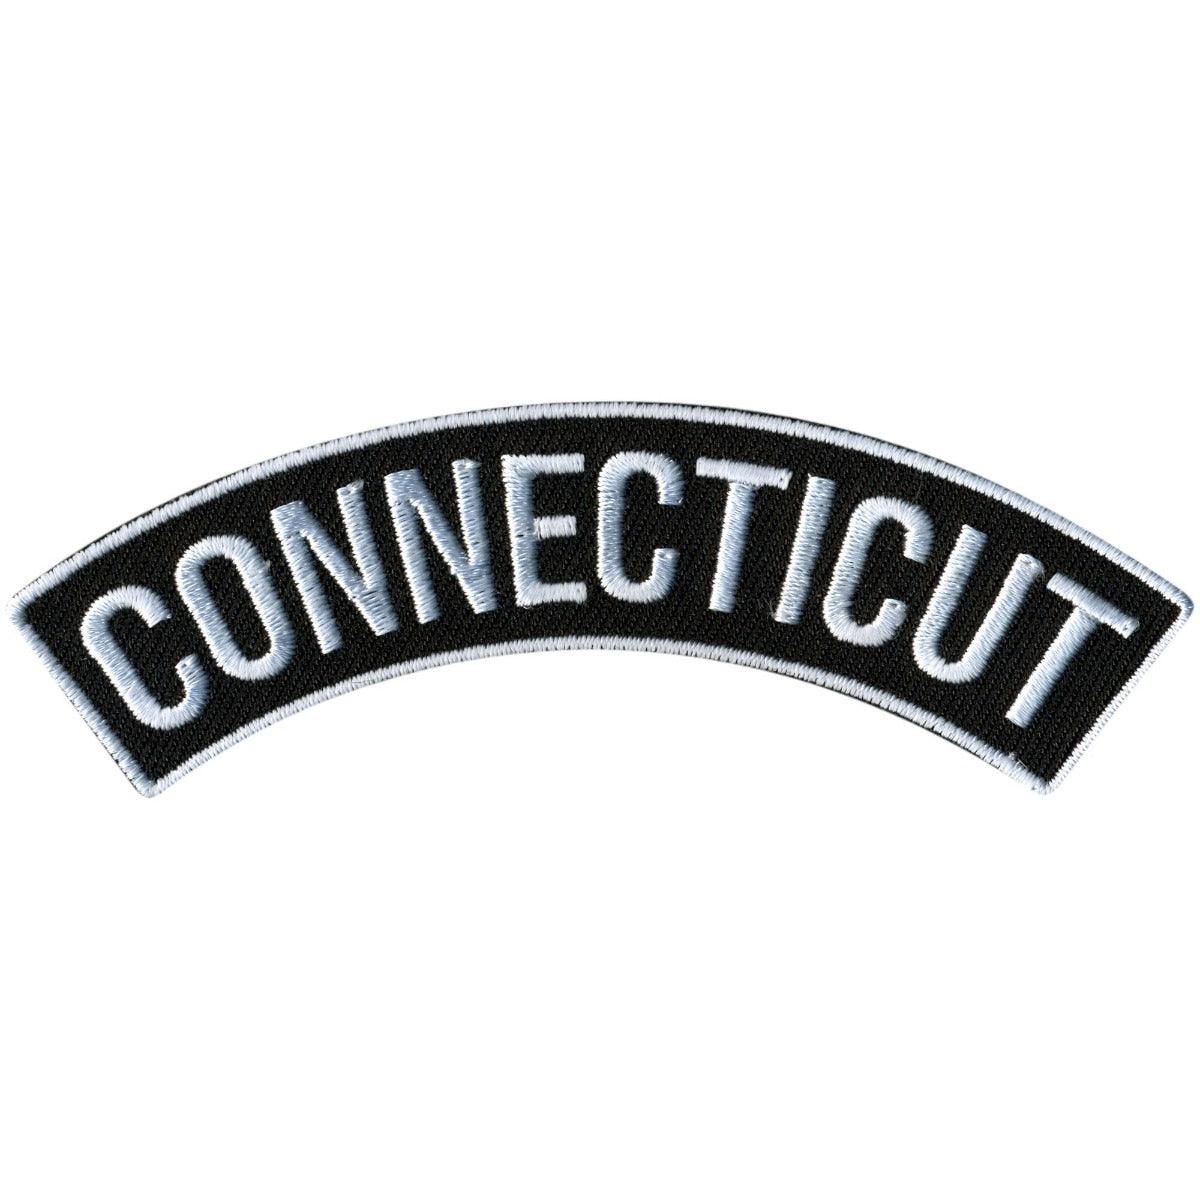 Hot Leathers Connecticut 4” X 1” Top Rocker Patch - American Legend Rider